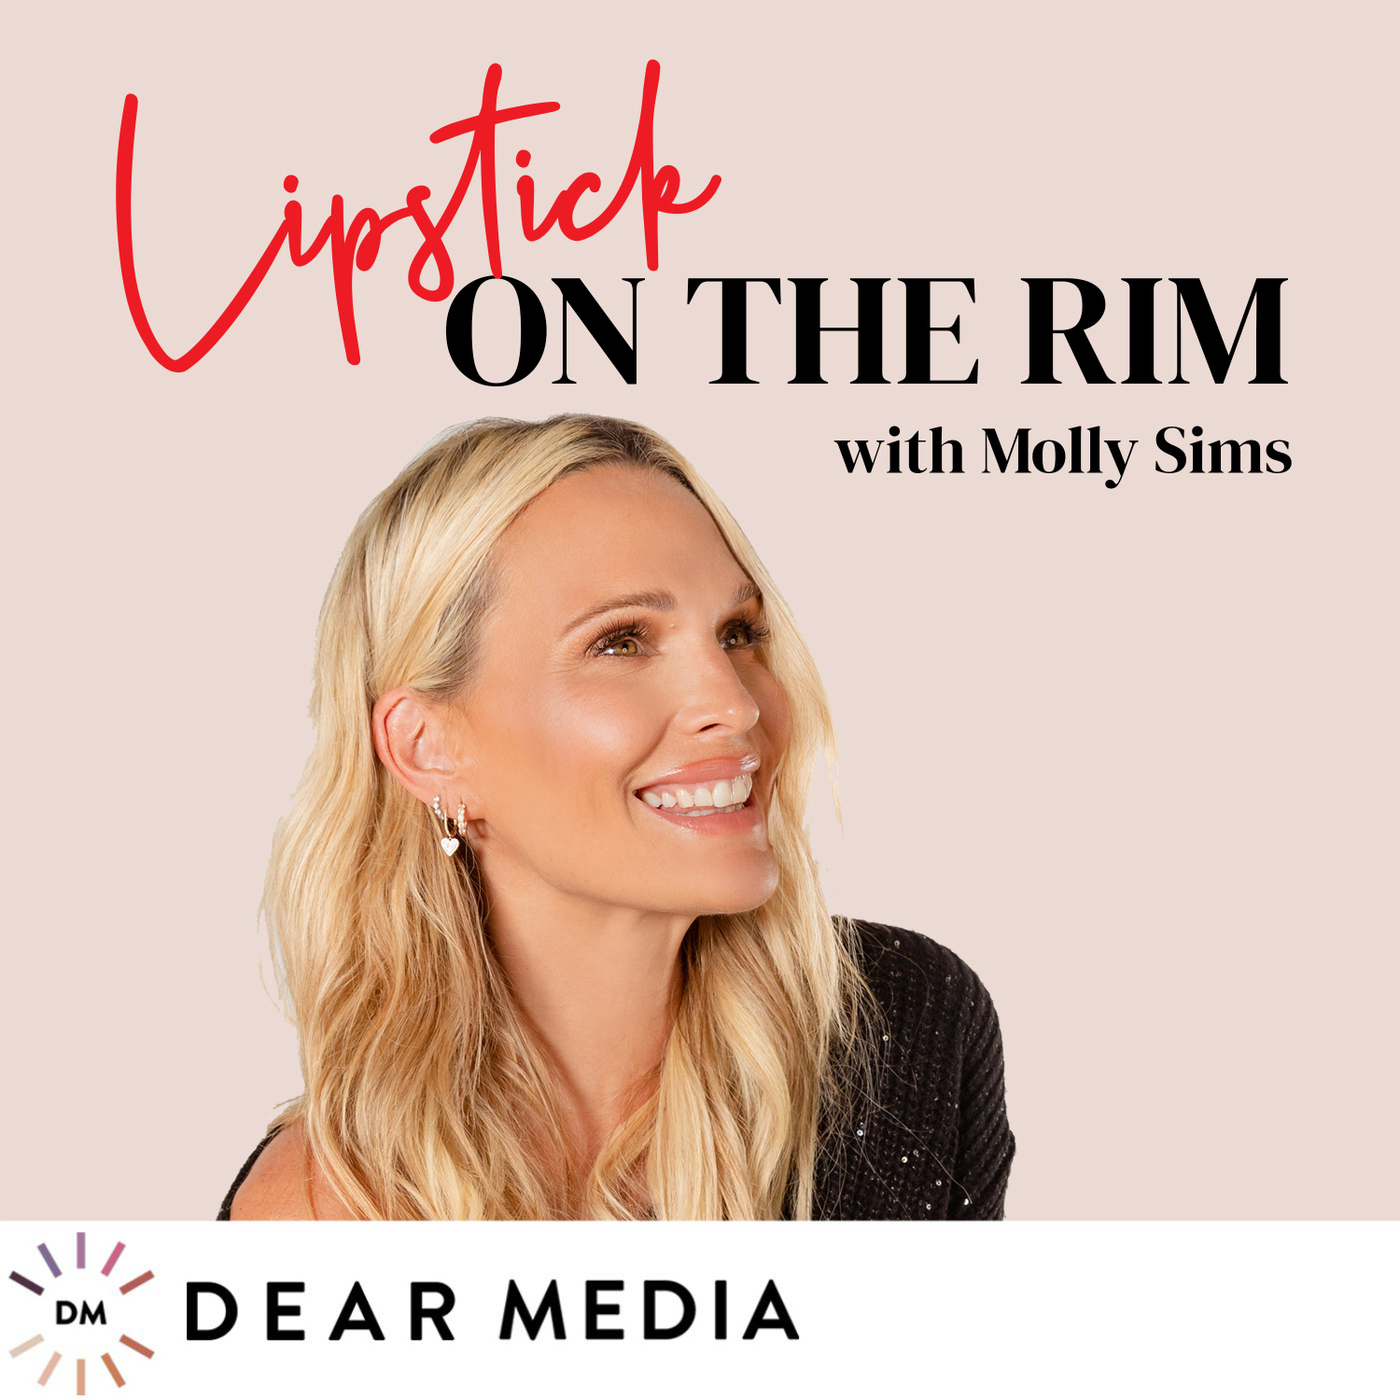 Molly Gets a Brow Lift Live on the Podcast with Celebrity Eyebrow Artist Kristie Streicher (Inventor of the Feathered Technique) Who Dishes on Microblading, Laminating, Tinting, Lifting, Tweezing, and